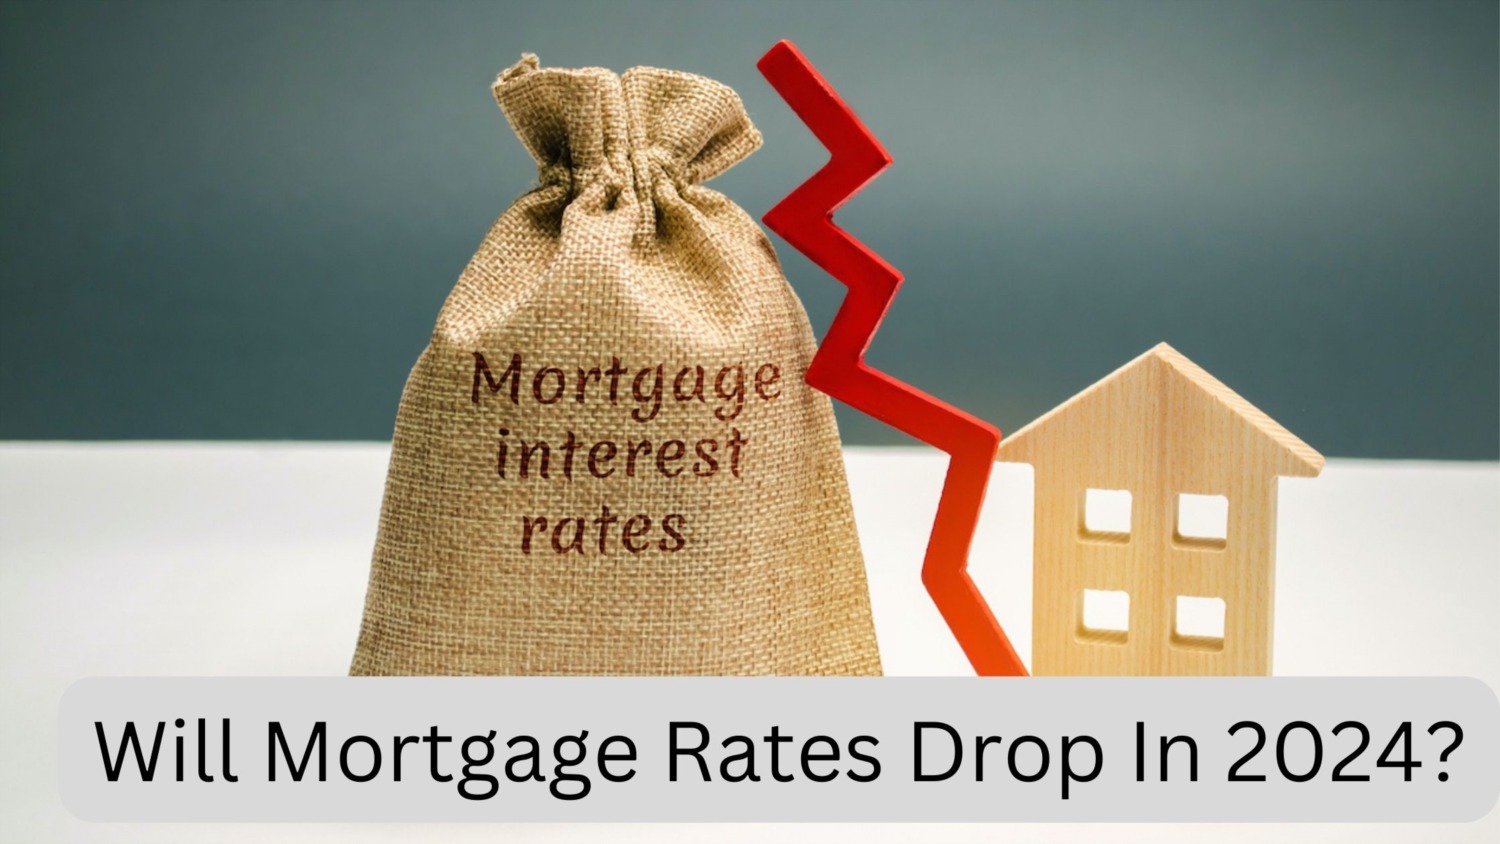 Will Mortgage Rates Drop In 2024?